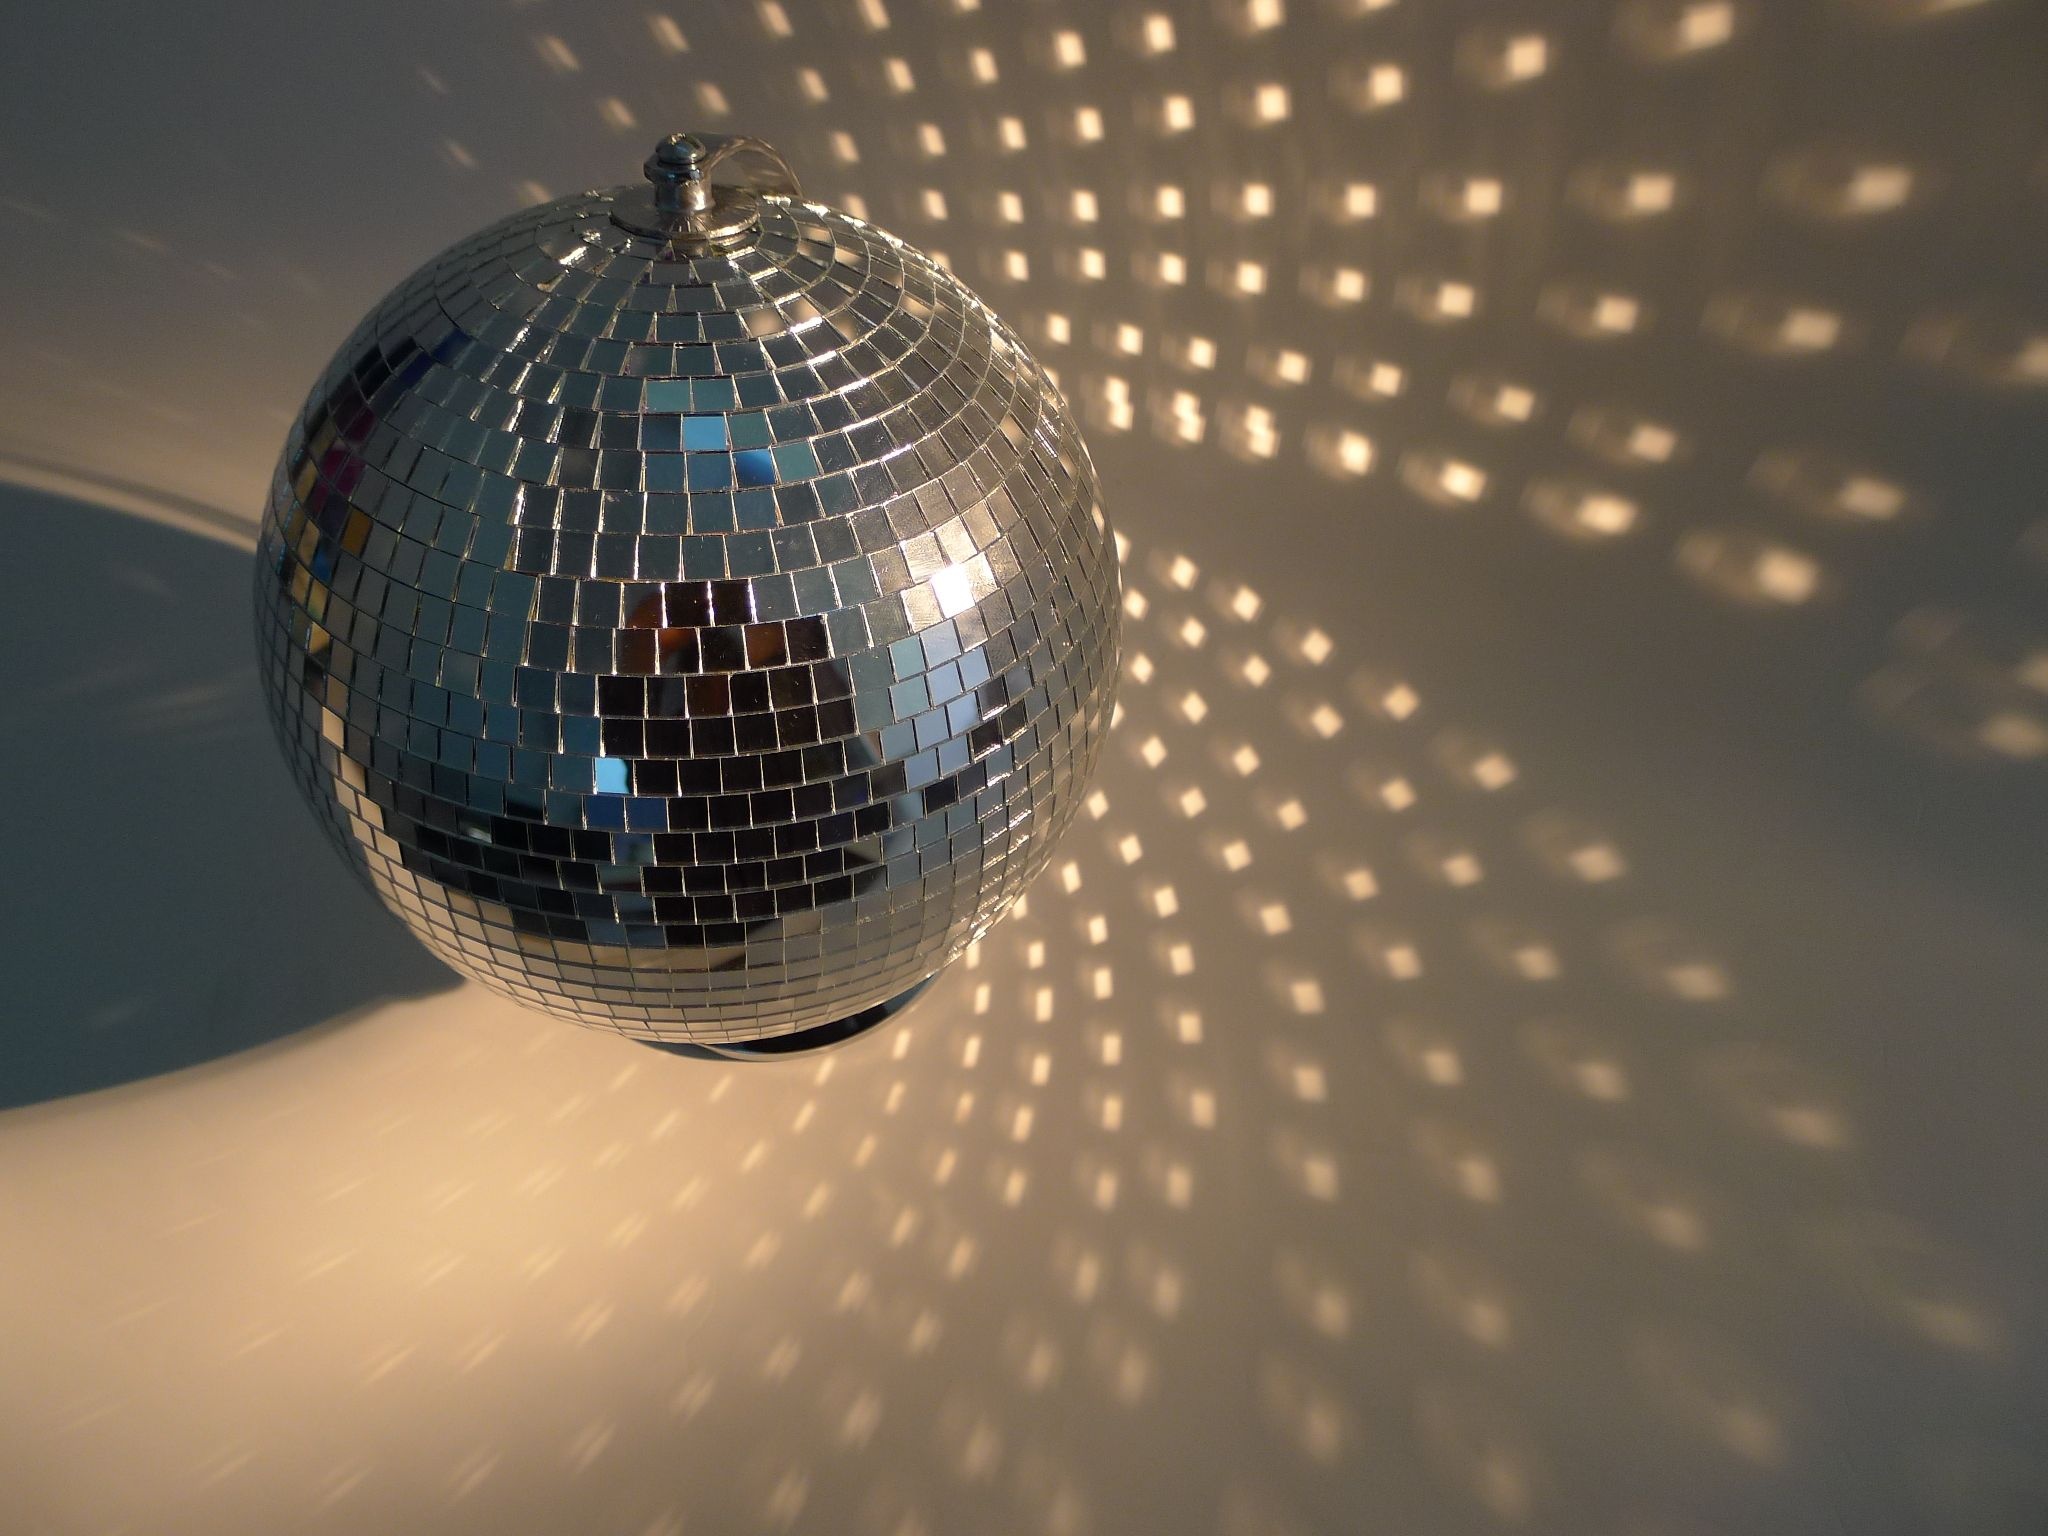 Discotheque: A mirrored surface, Illuminated by spotlights, Beams of light, Party decoration. 2050x1540 HD Wallpaper.